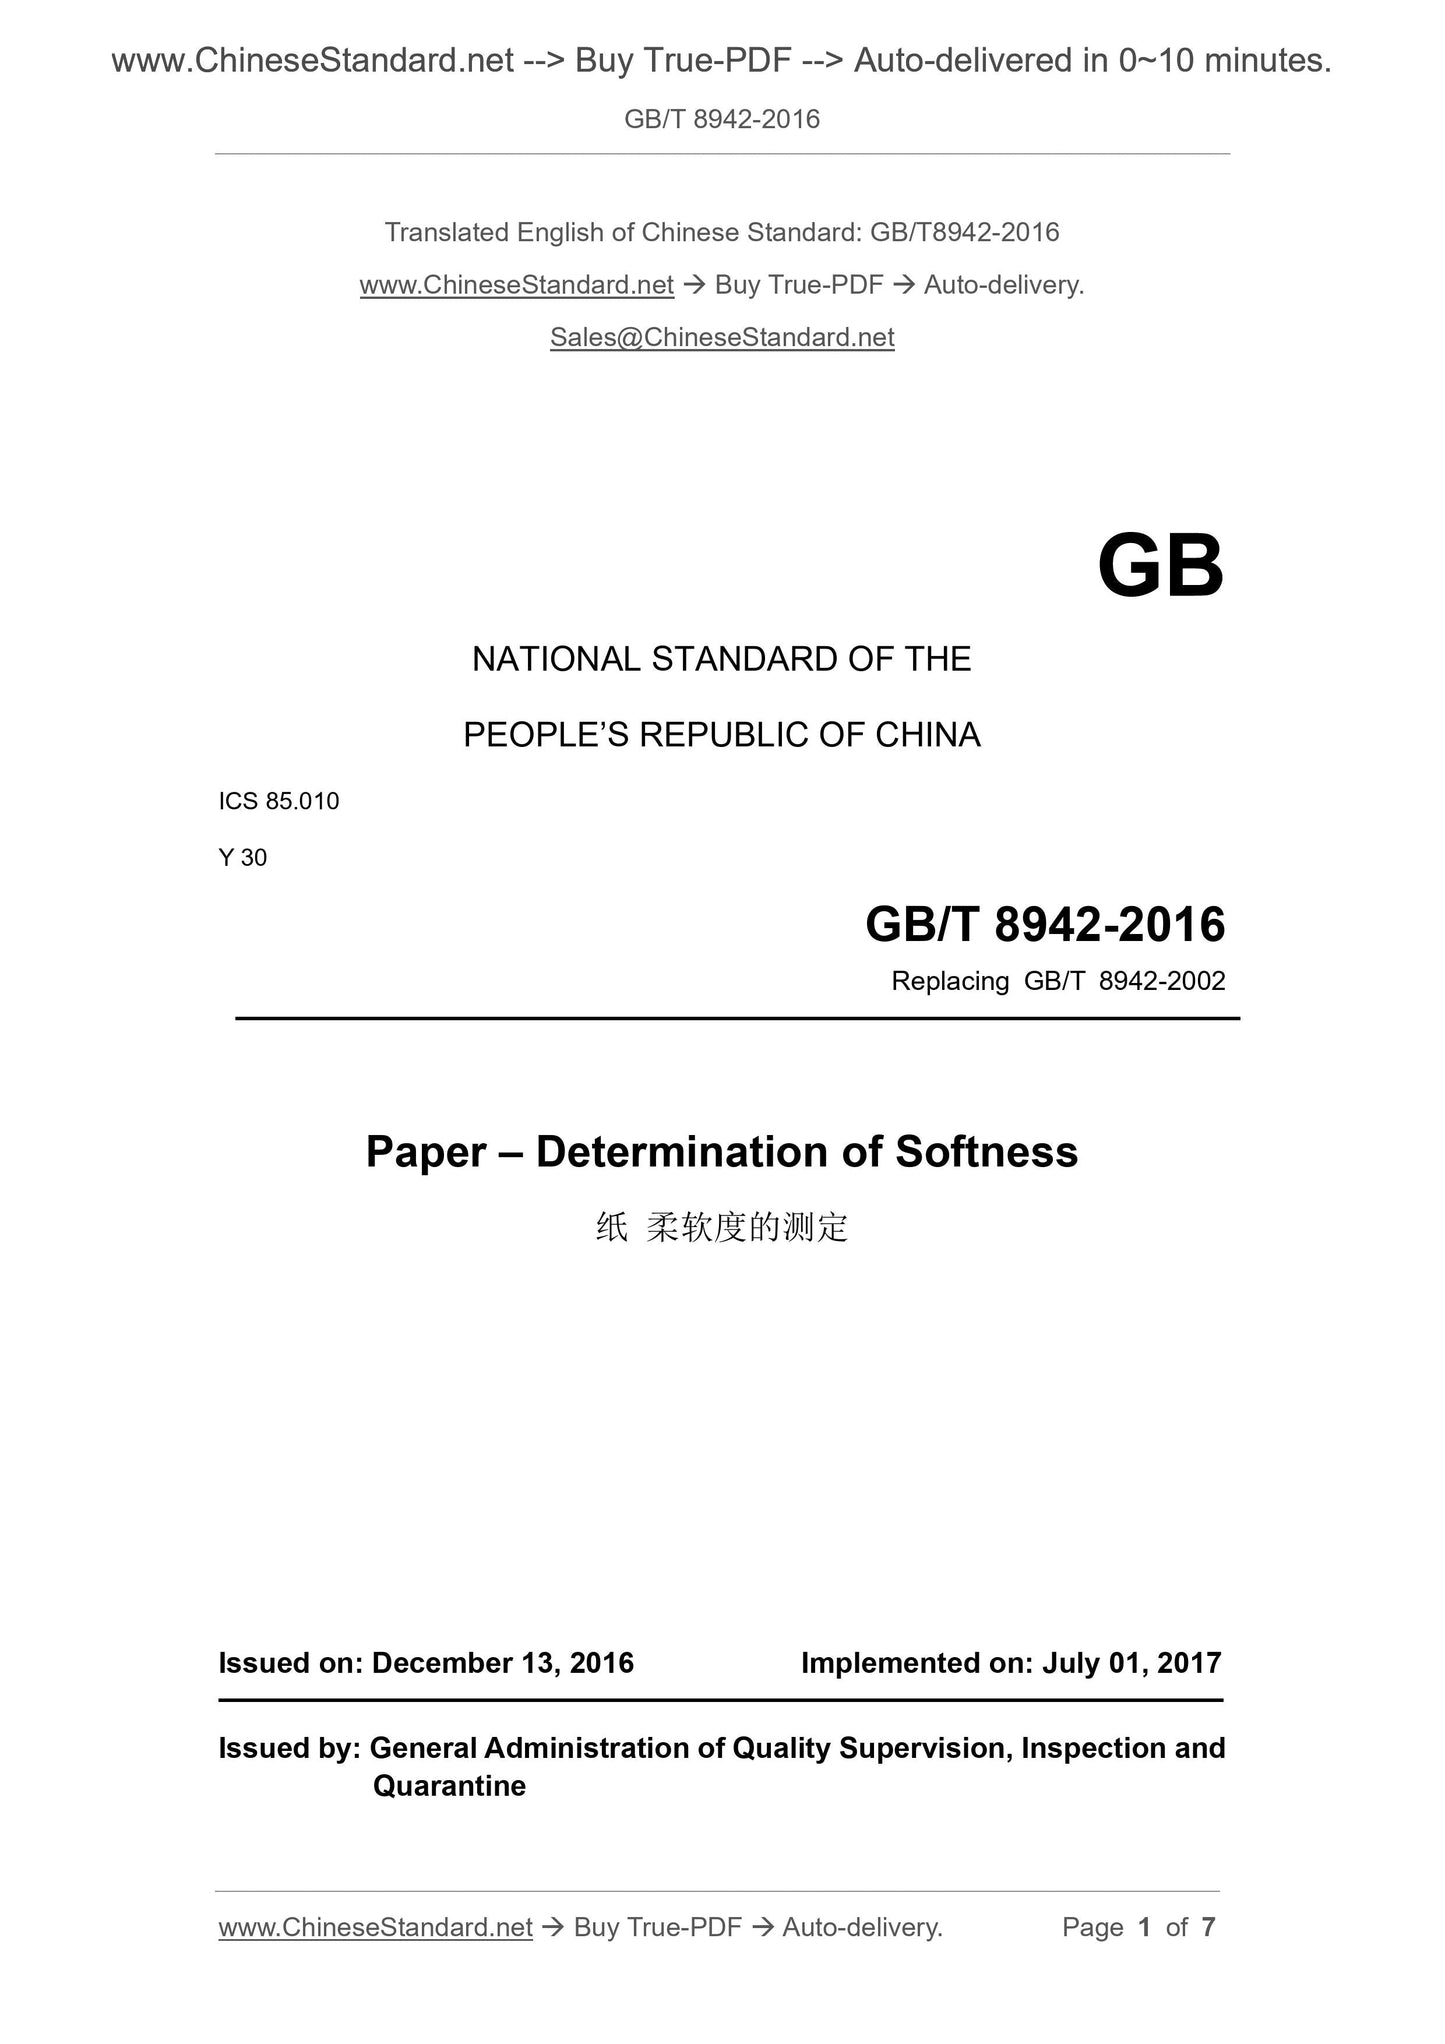 GB/T 8942-2016 Page 1